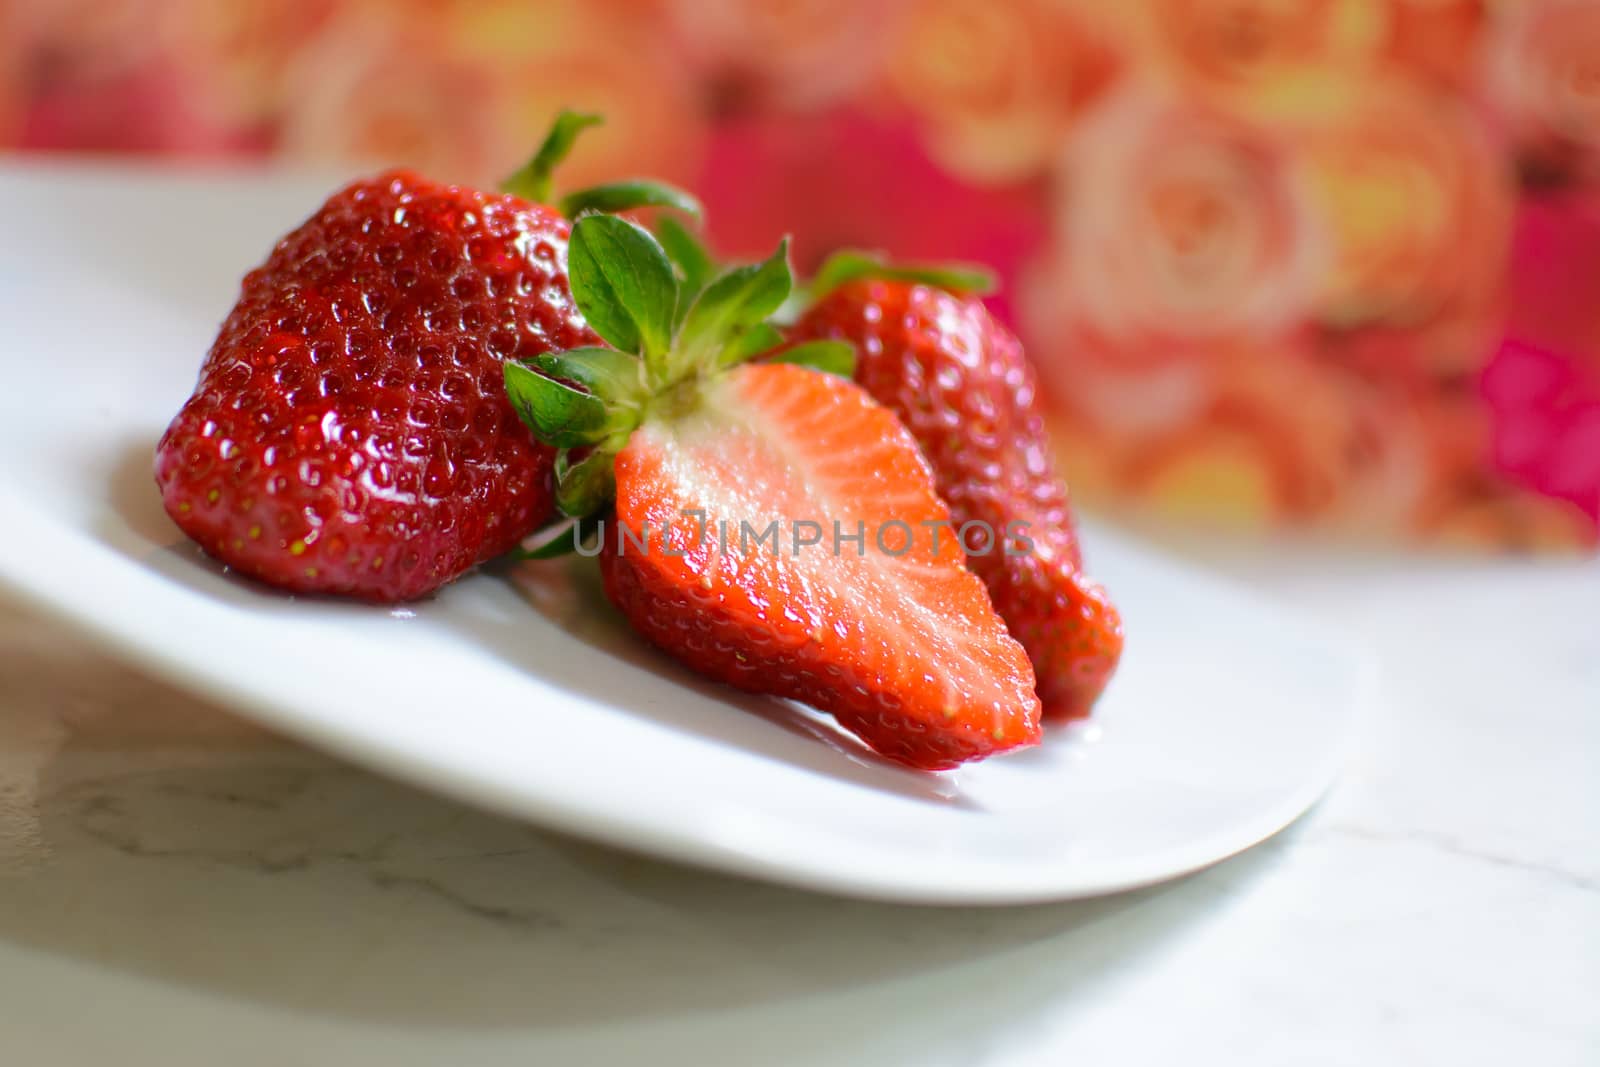 strawberry served on white plate